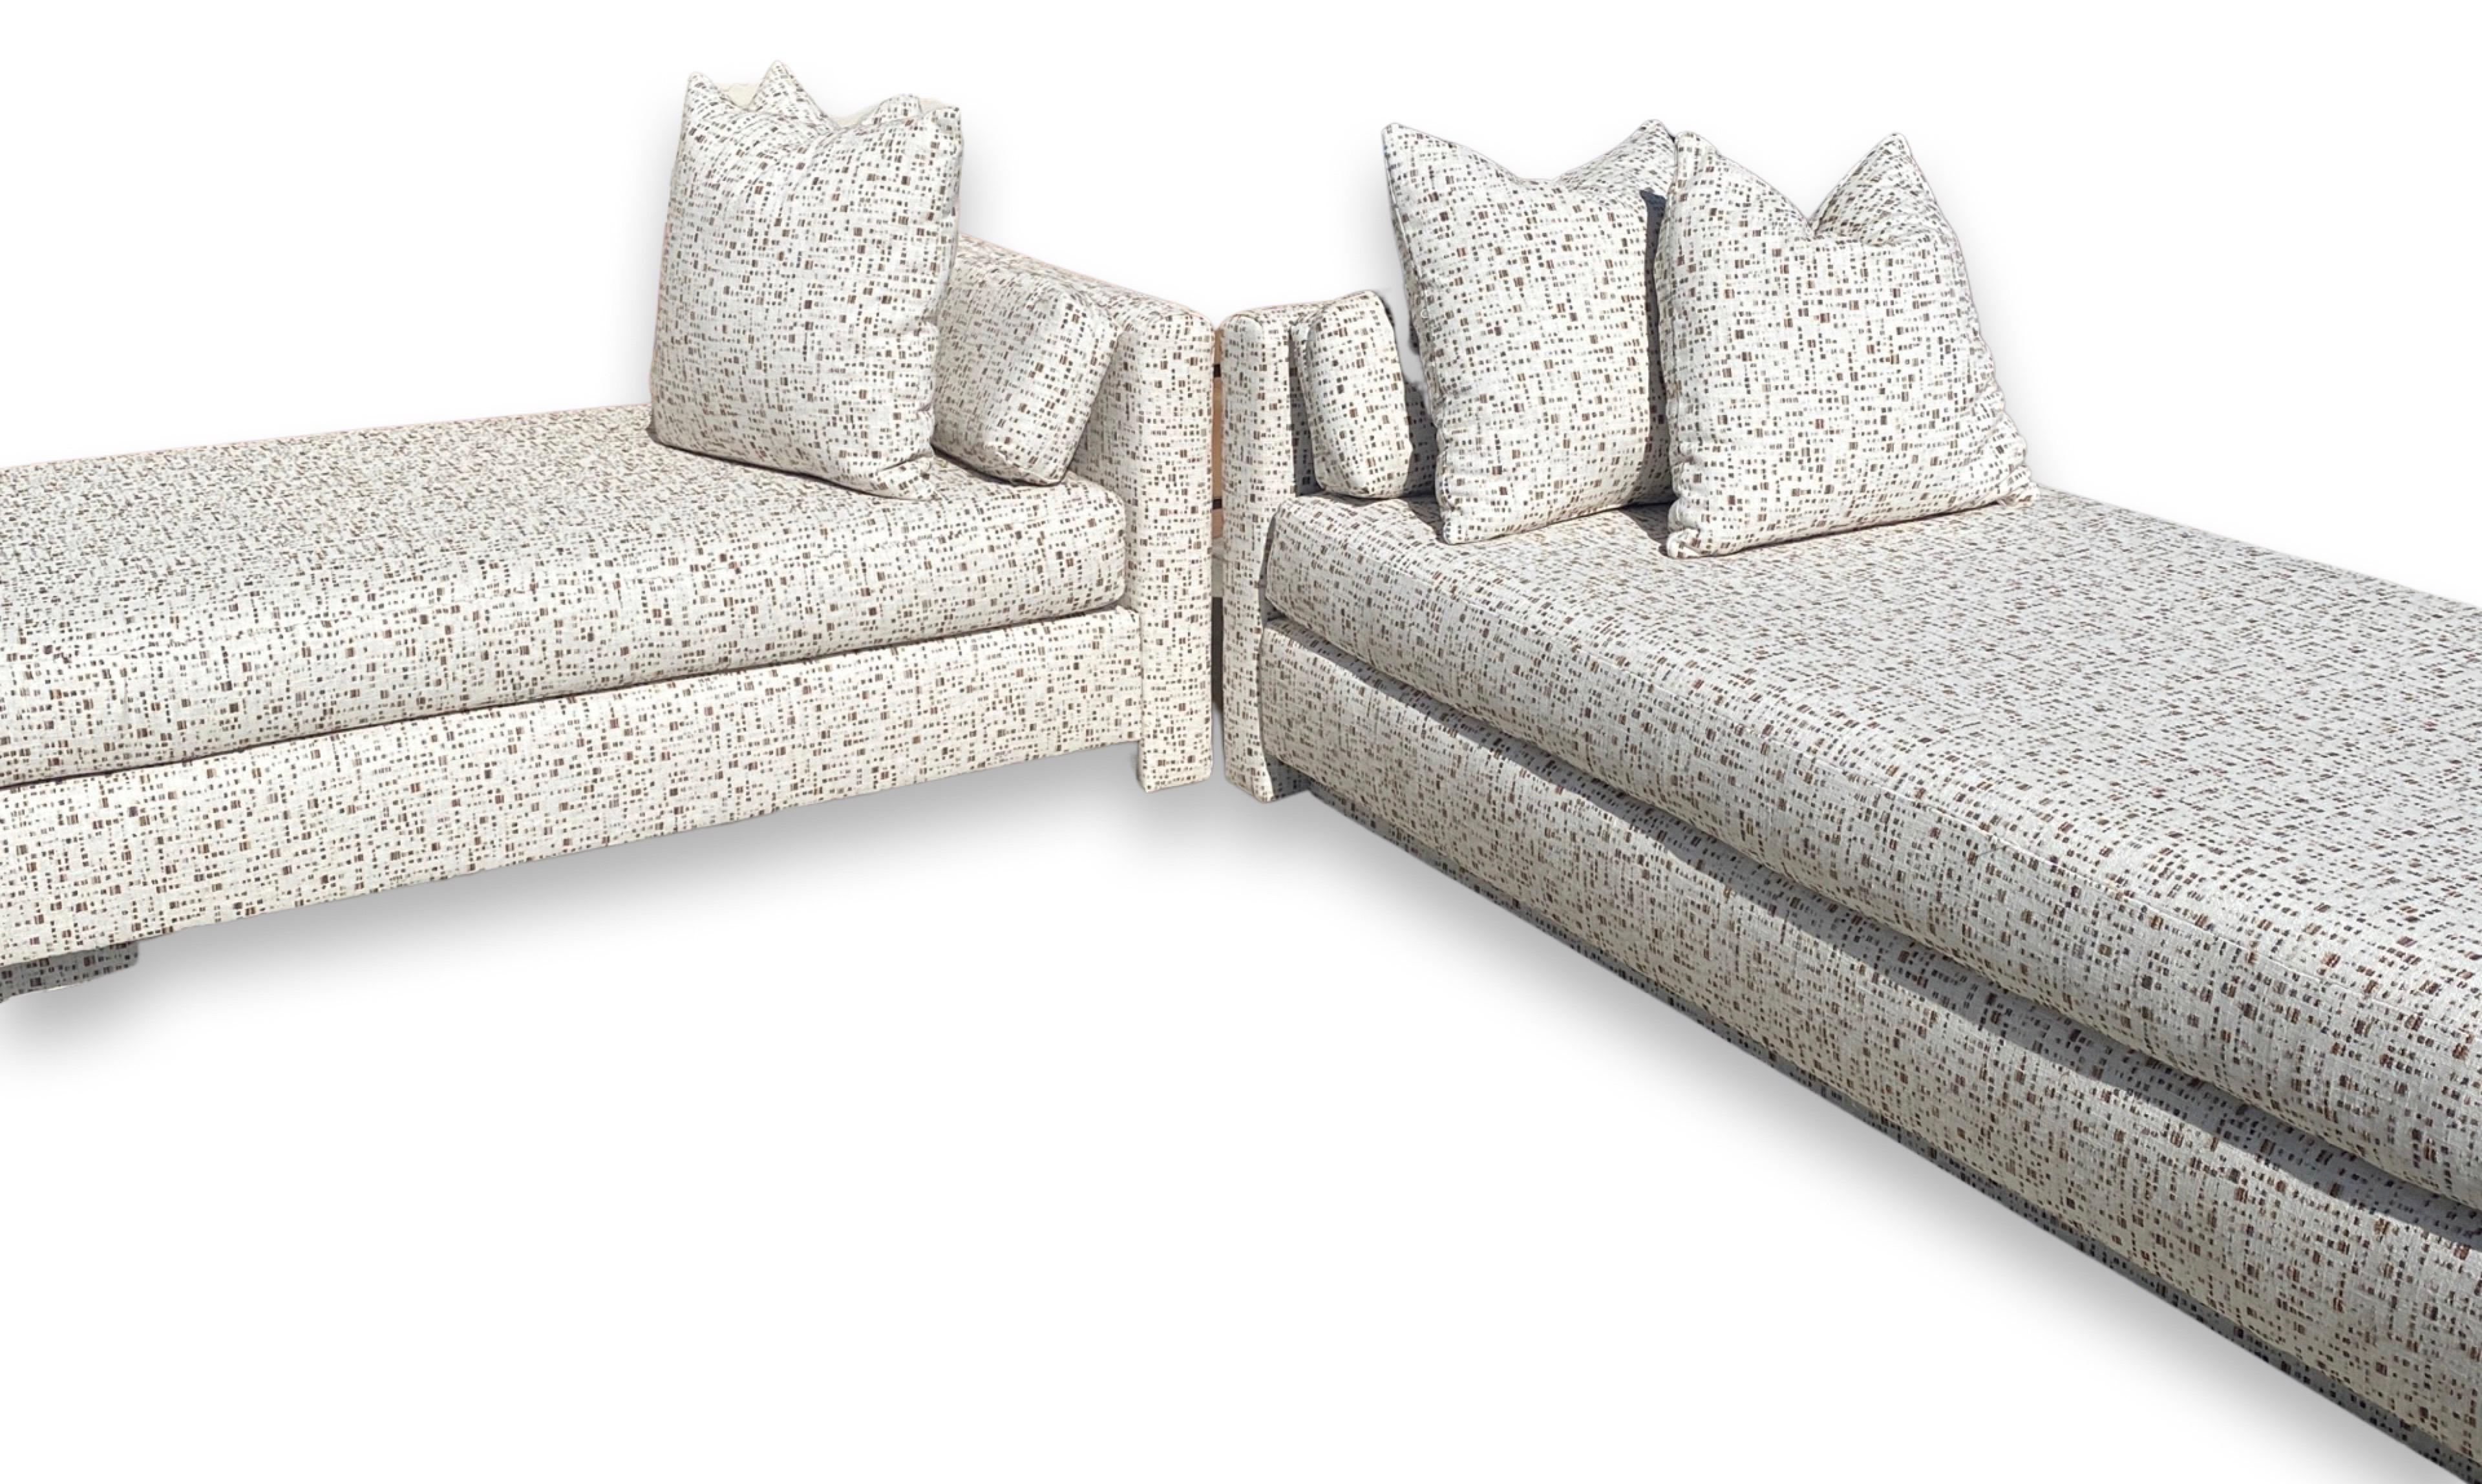 Sofa and Chaise Set in Modern Geometric Neutral Fabric in Style of Steve Chase For Sale 6